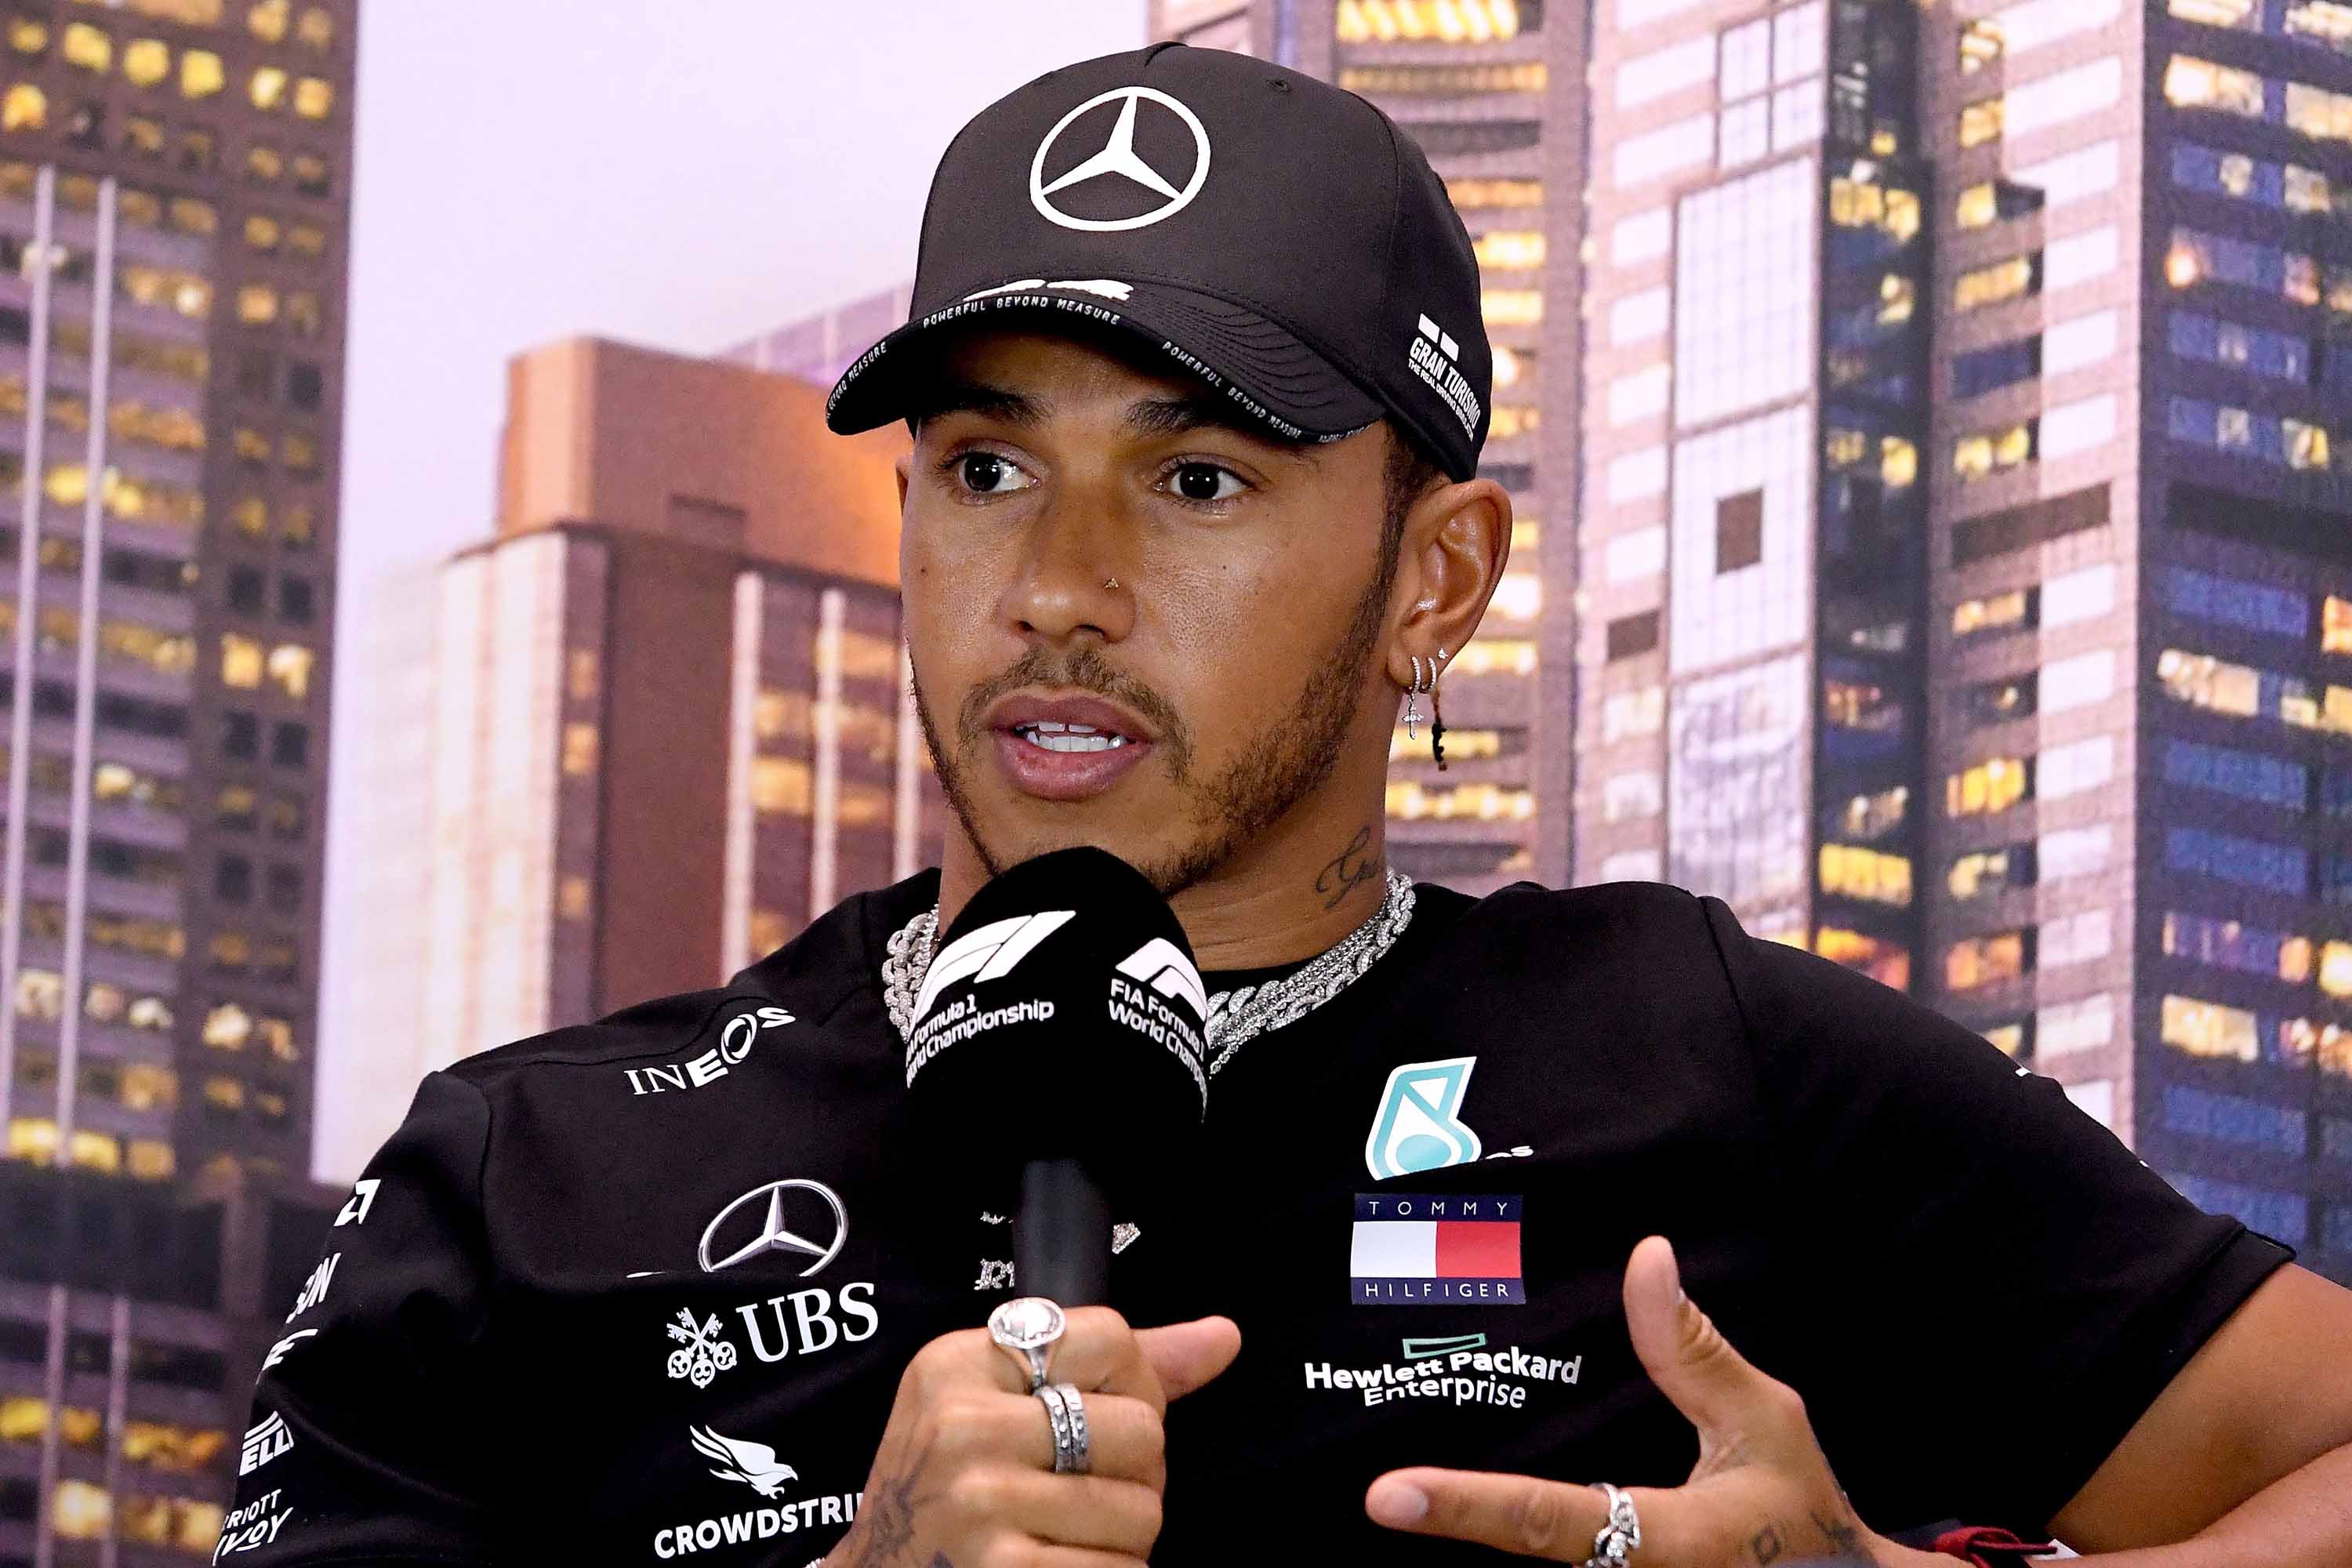 Lewis Hamilton attends a press conference ahead of the Formula One Australian Grand Prix in Melbourne on Thursday.